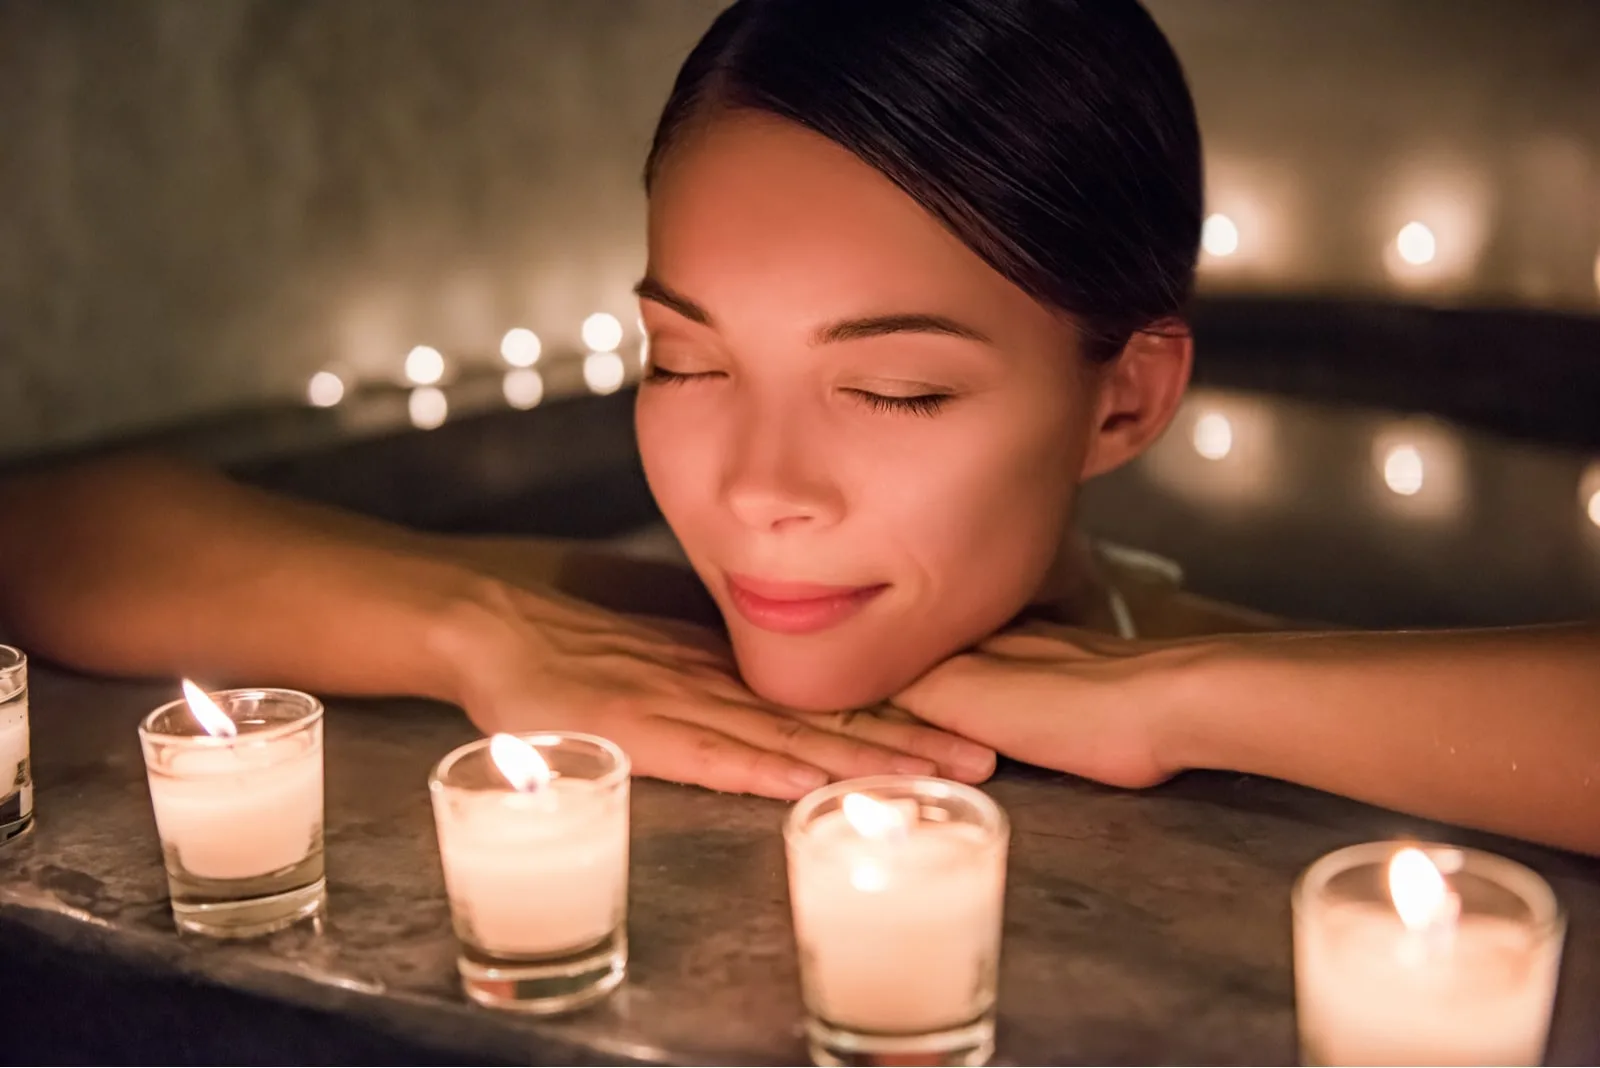 woman enjoying the bath with candles